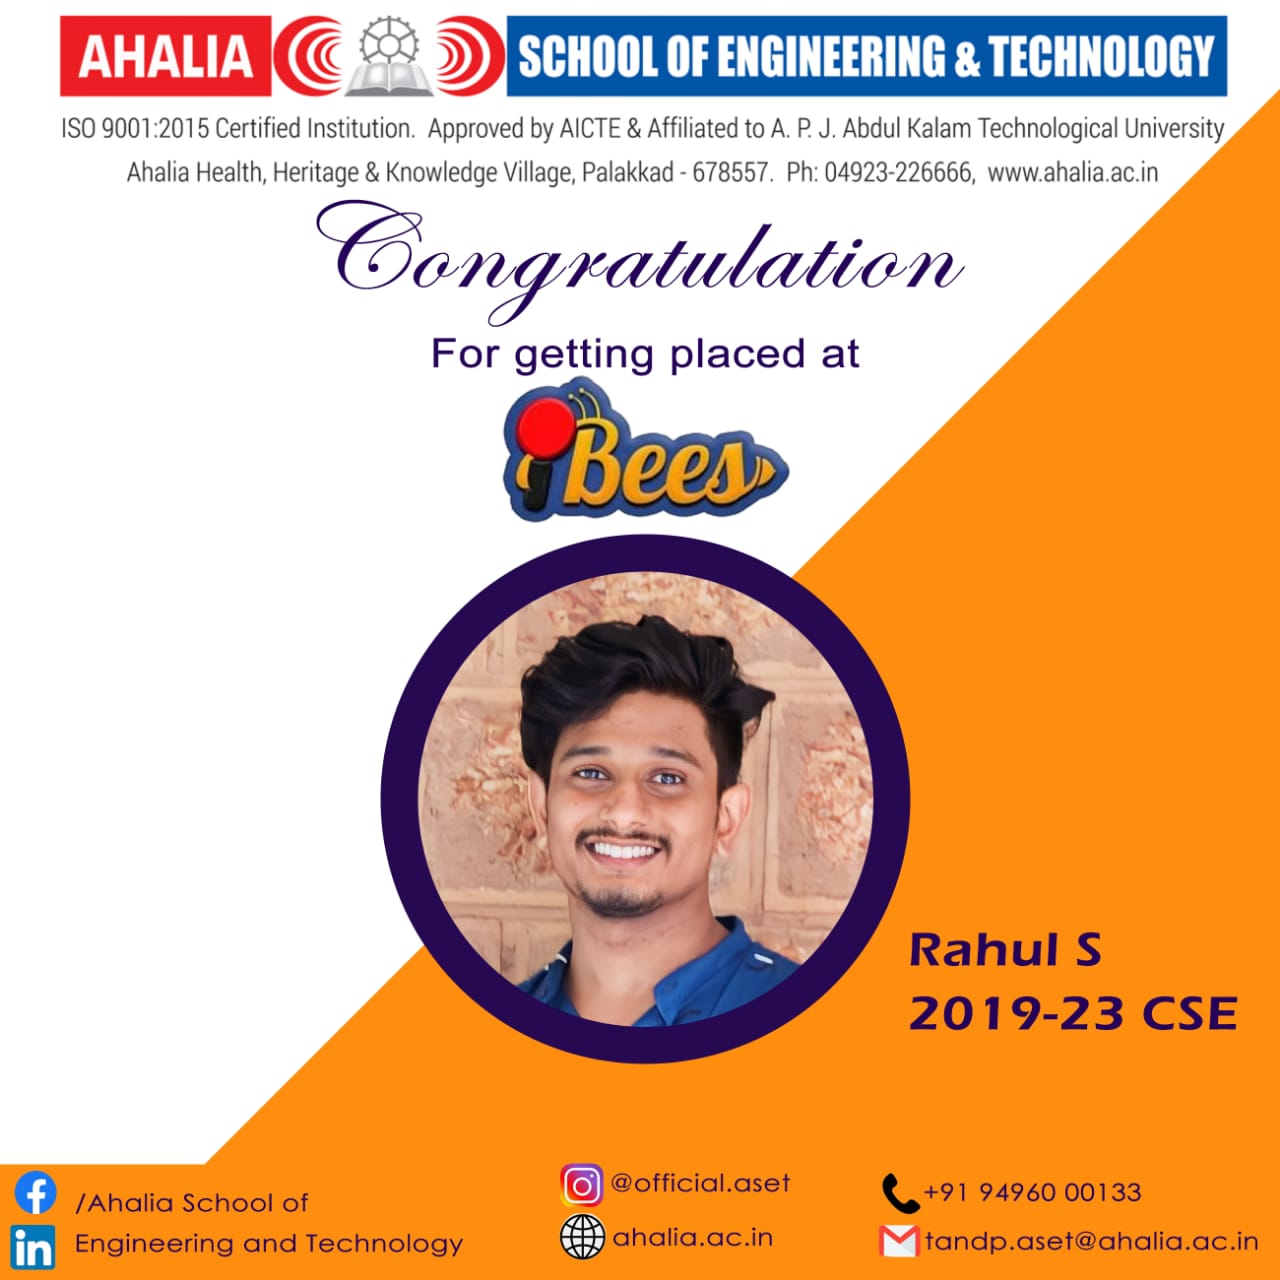 Rahul S. Placed in iBees